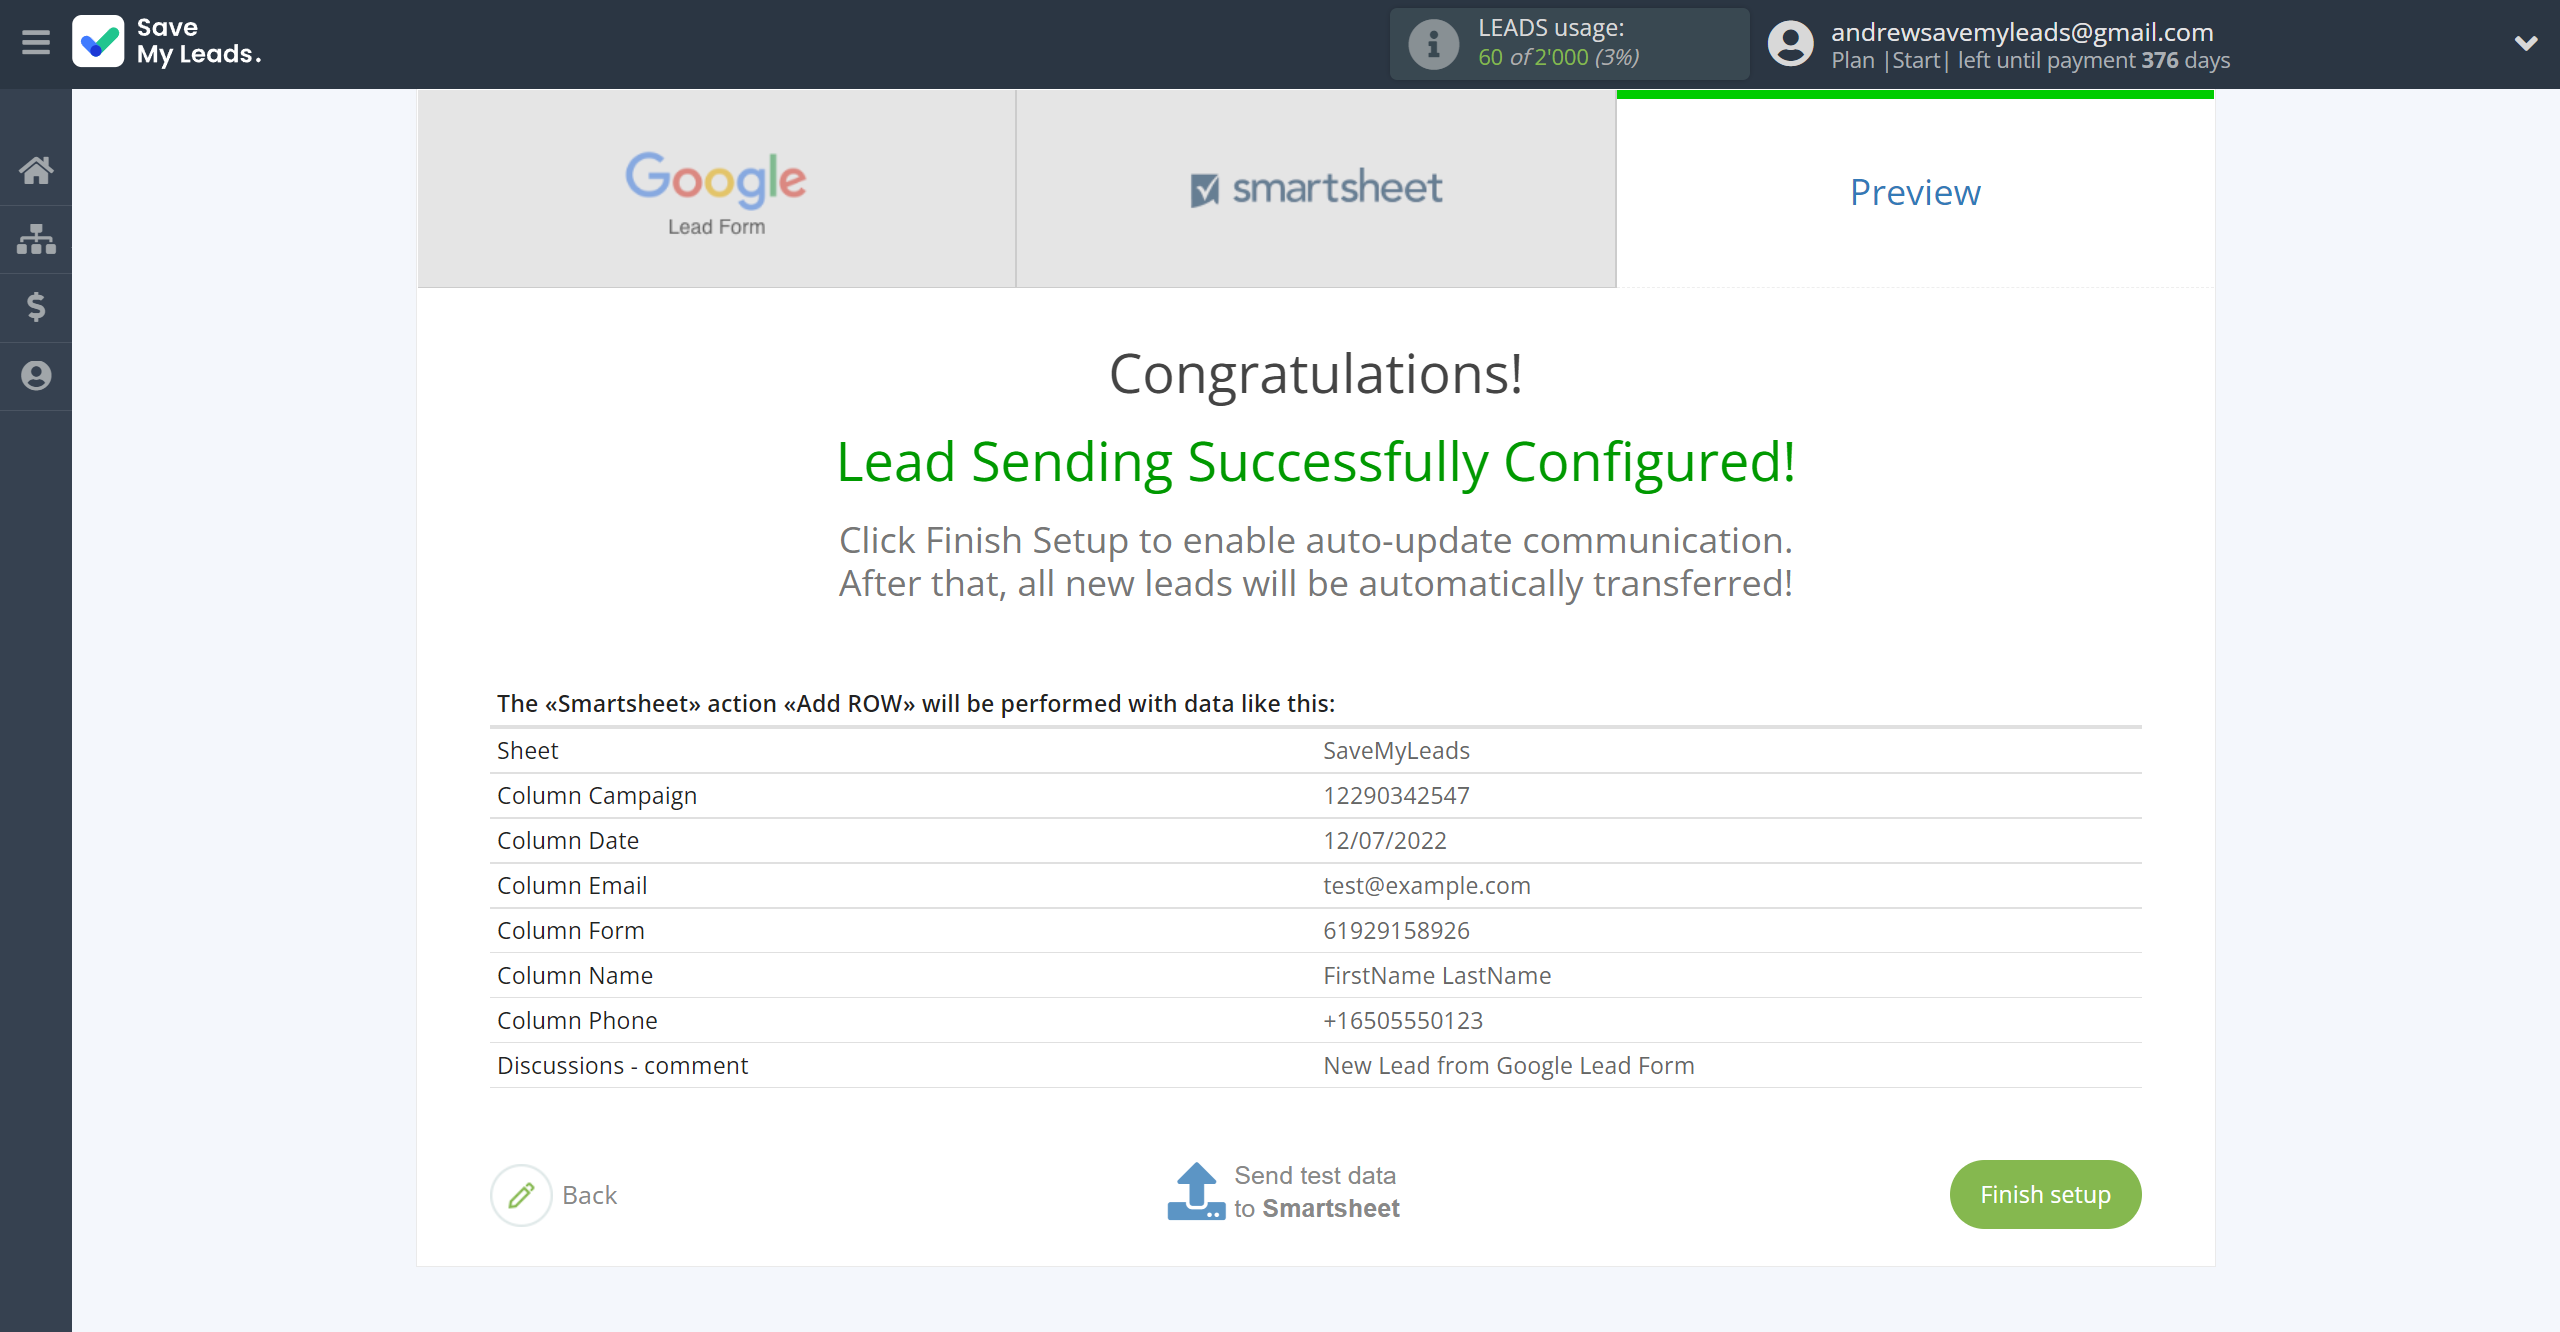 How to Connect Google Lead Form with Smartsheet | Test data